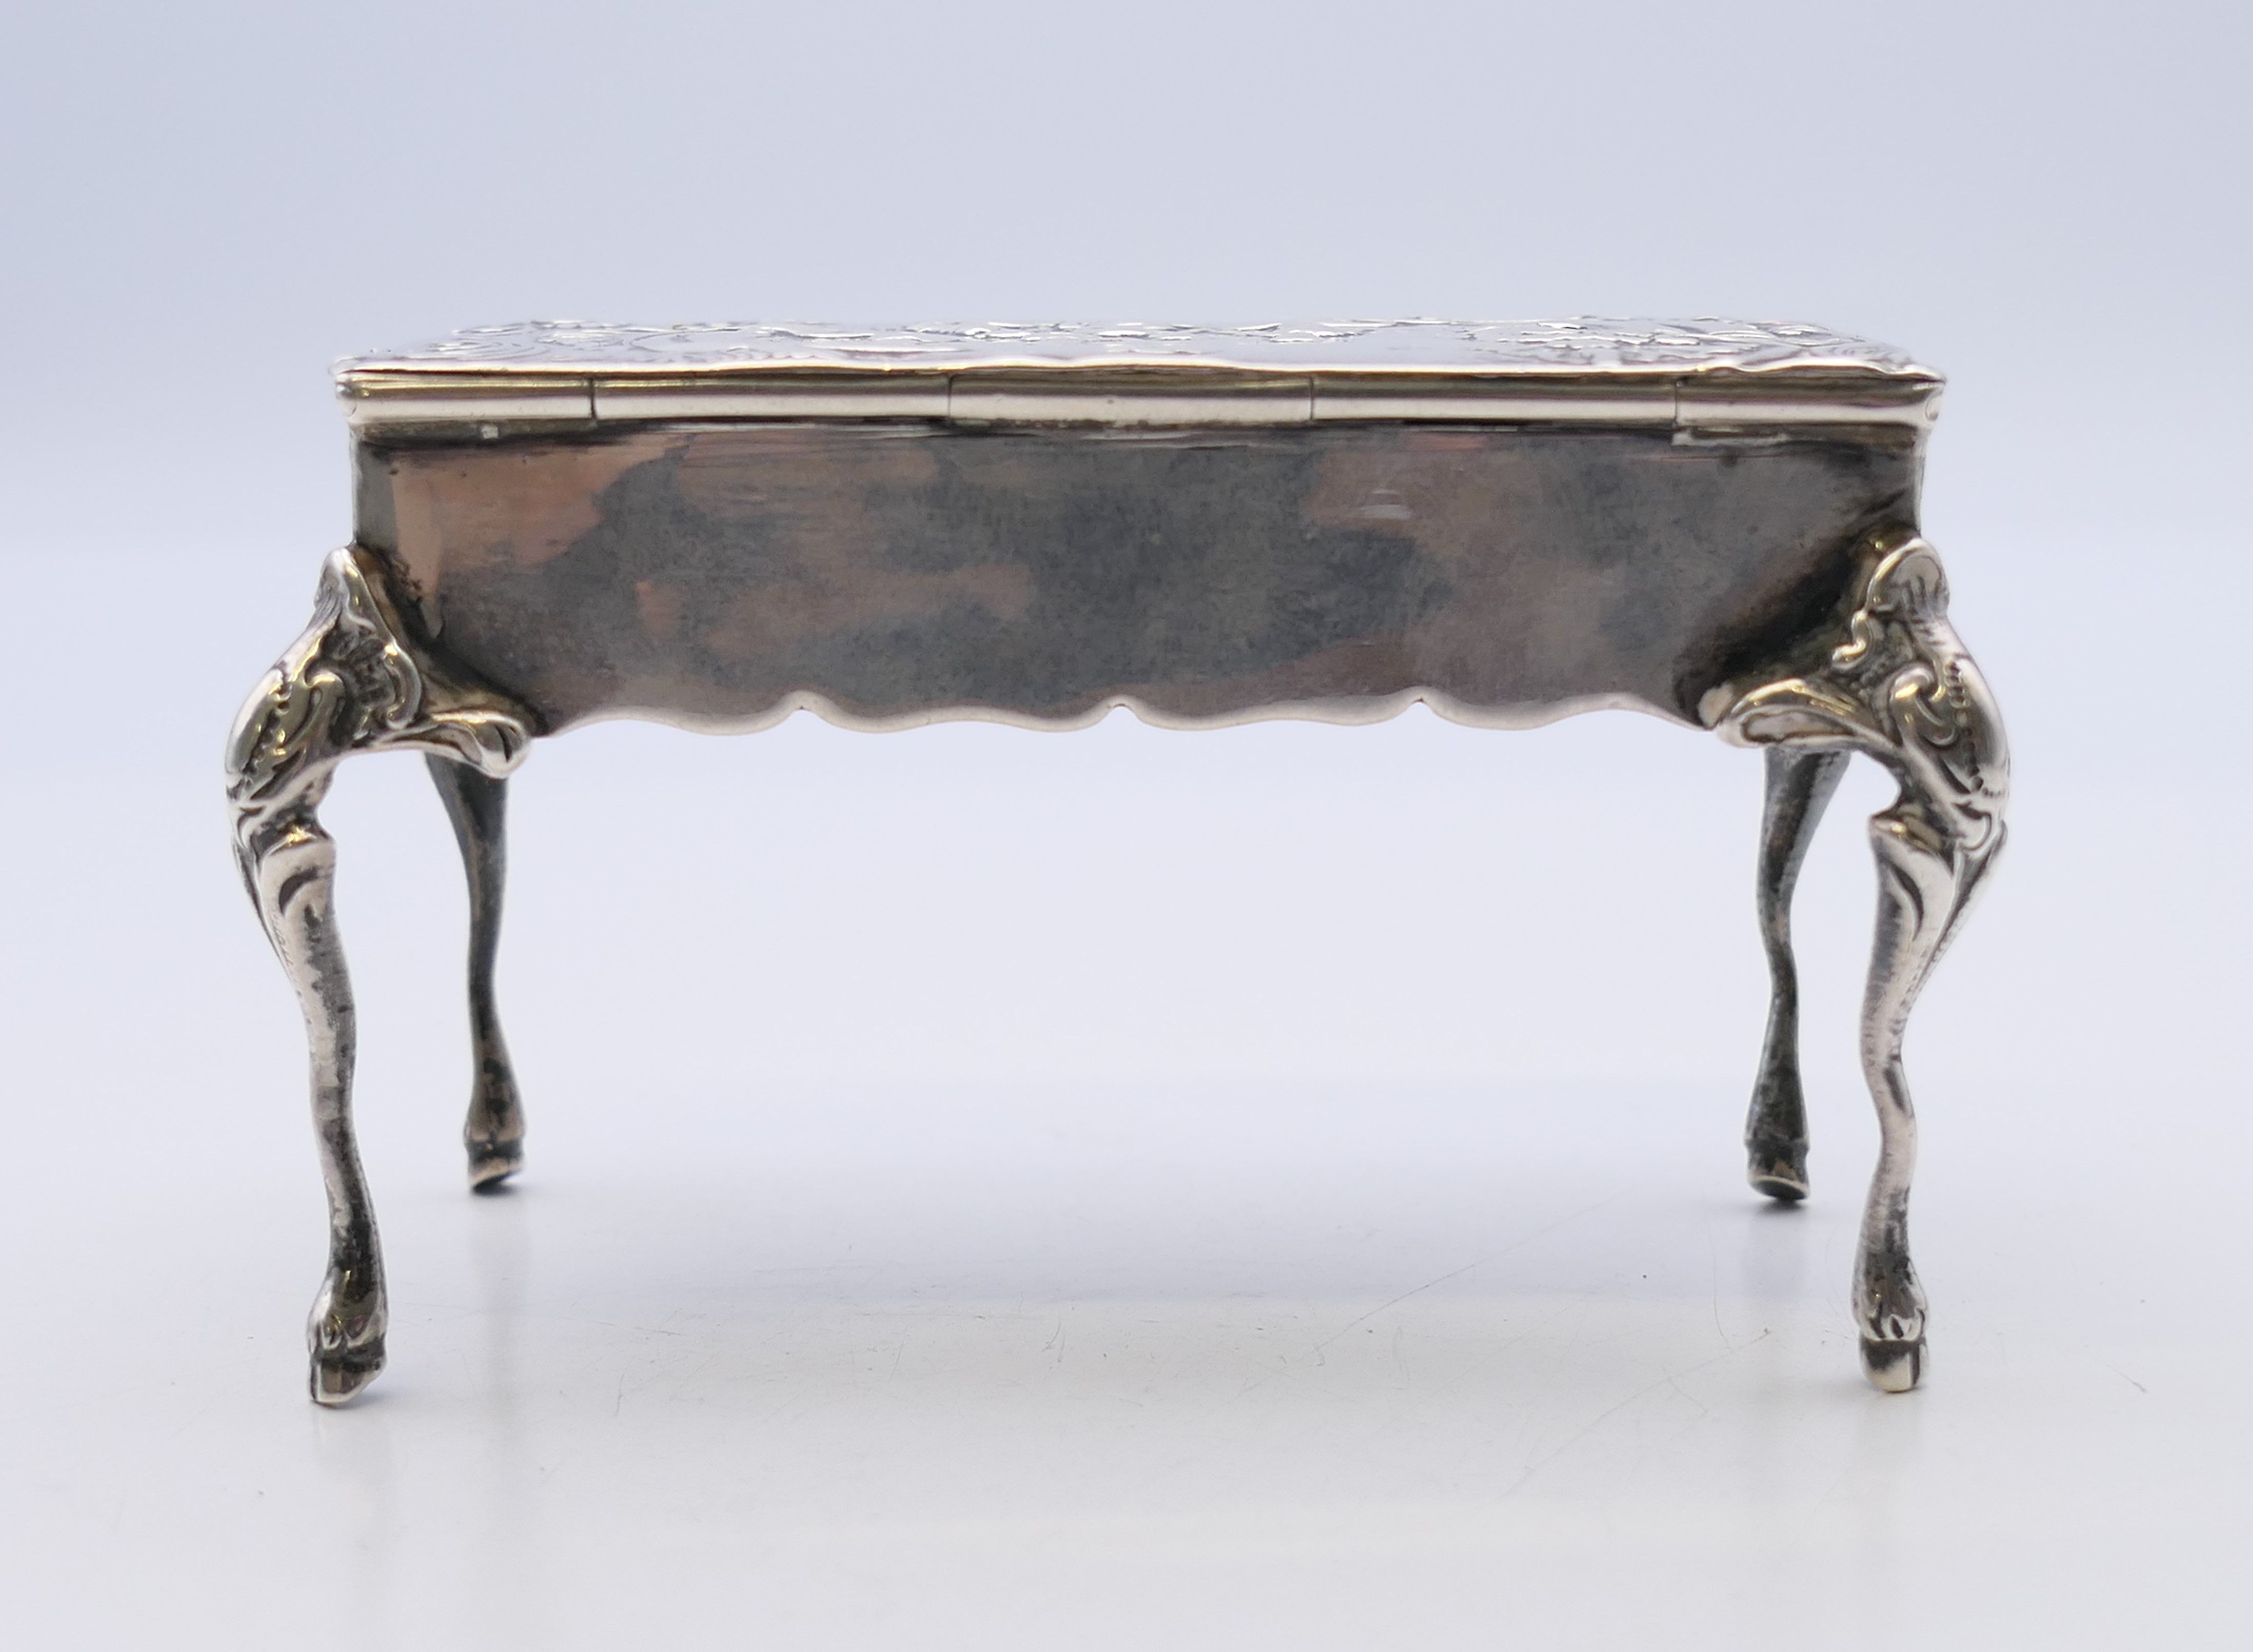 An embossed silver trinket box formed as a table, import marks for London 1899. - Image 5 of 11